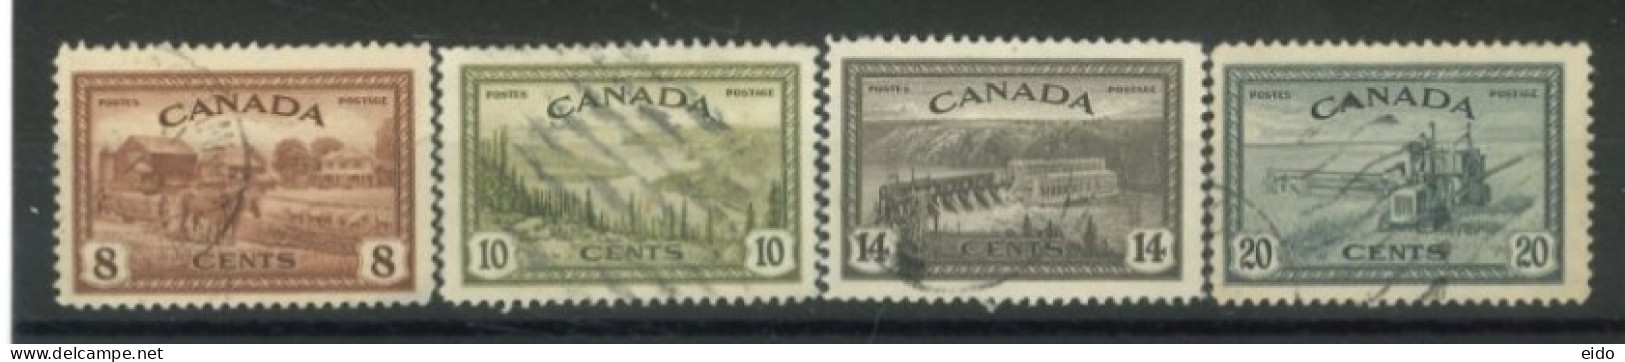 CANADA - 1946, RE CONVERTION TO PEACE STAMPS SET OF 4, USED. - Oblitérés